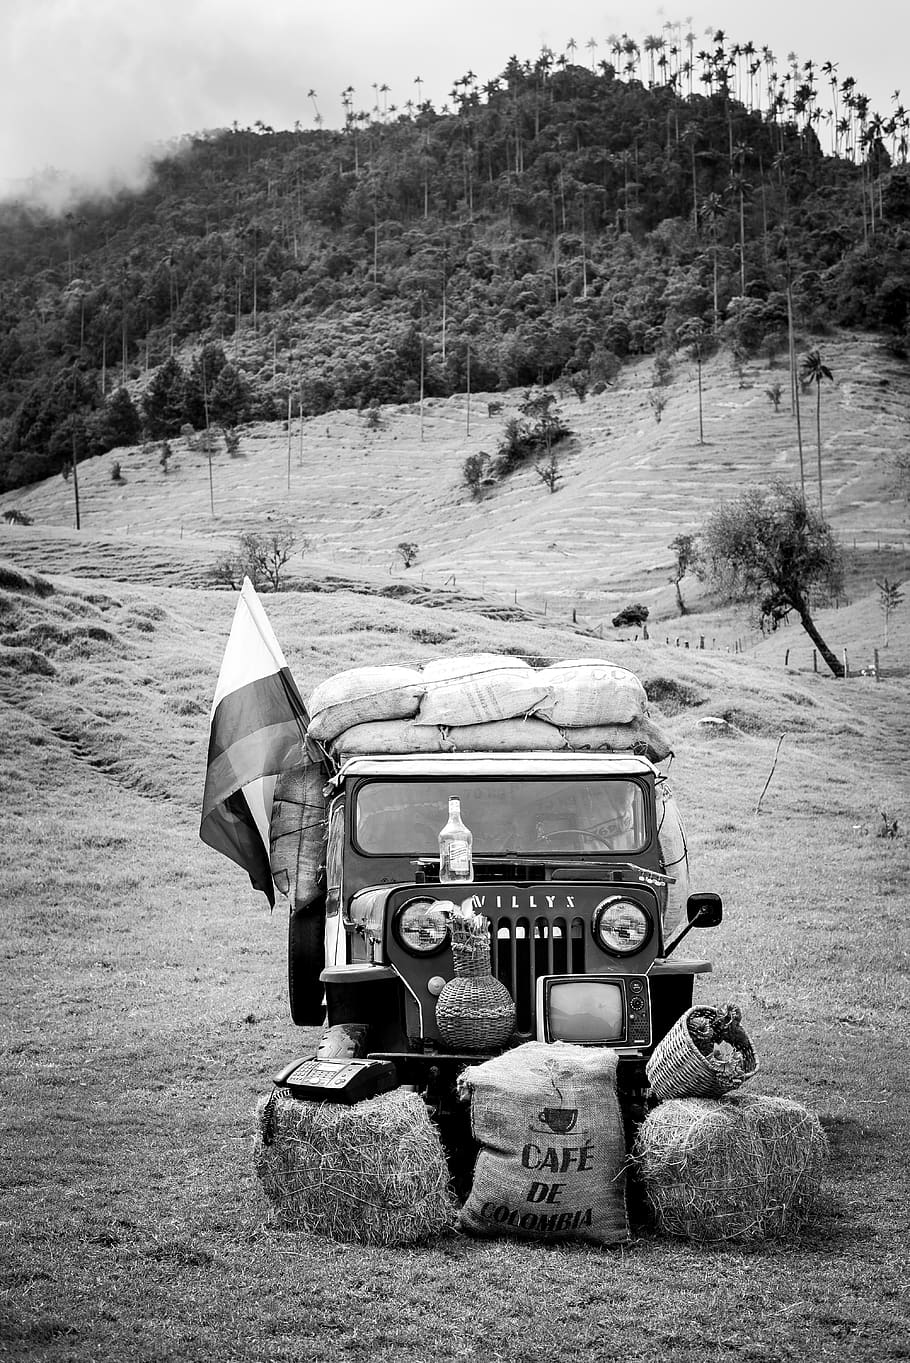 jeep, black and white, peasant, hard work, tourism, colombia, flag, mountain, palm tree, coffee beans